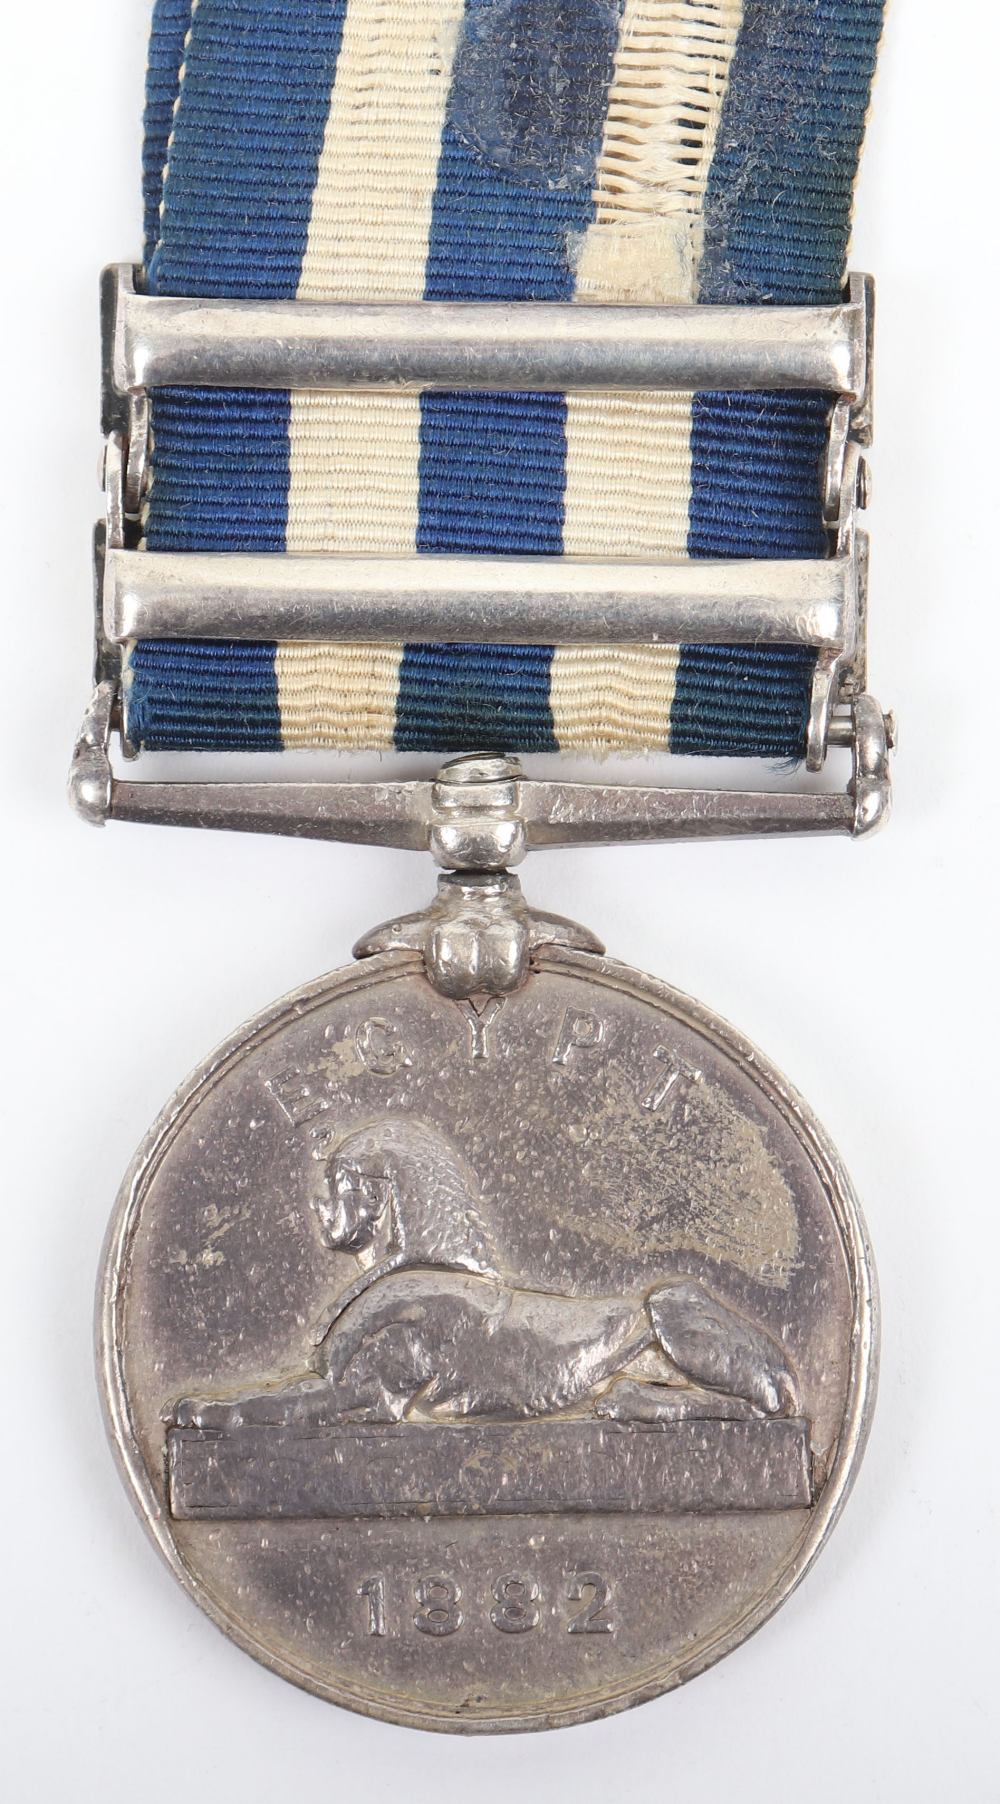 British Egypt and Sudan 1882-89 Campaign Medal - Image 3 of 4